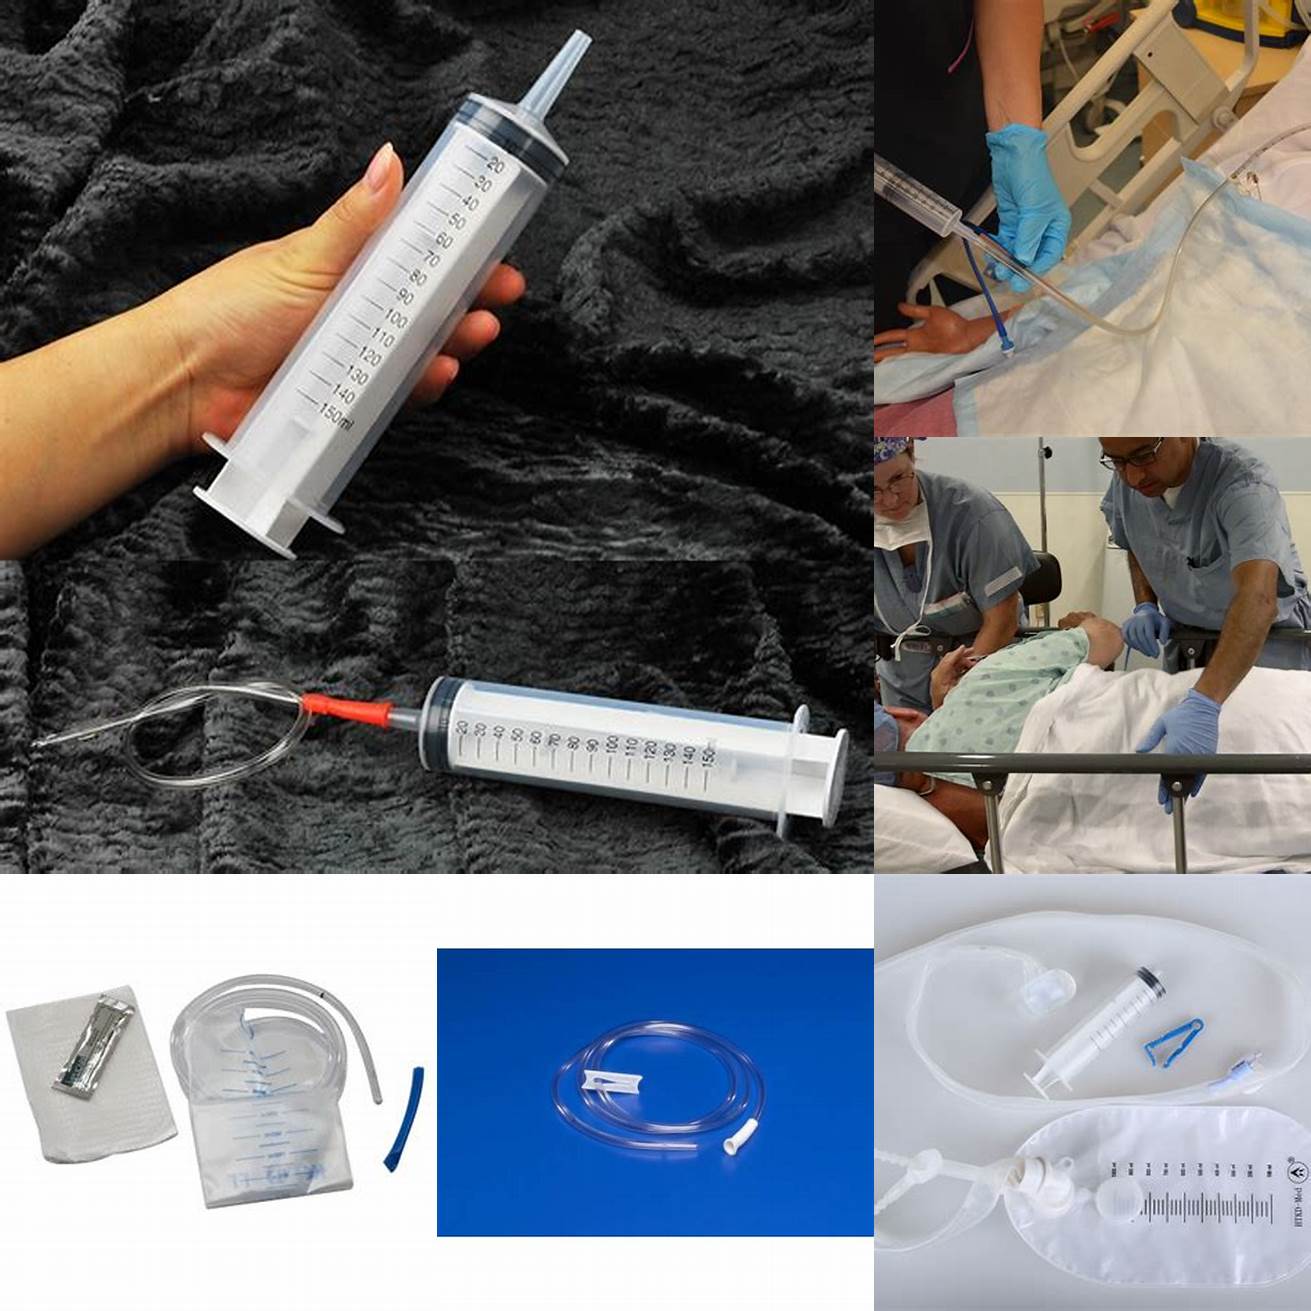 Use a lubricated tube or syringe to minimize the risk of rectal trauma